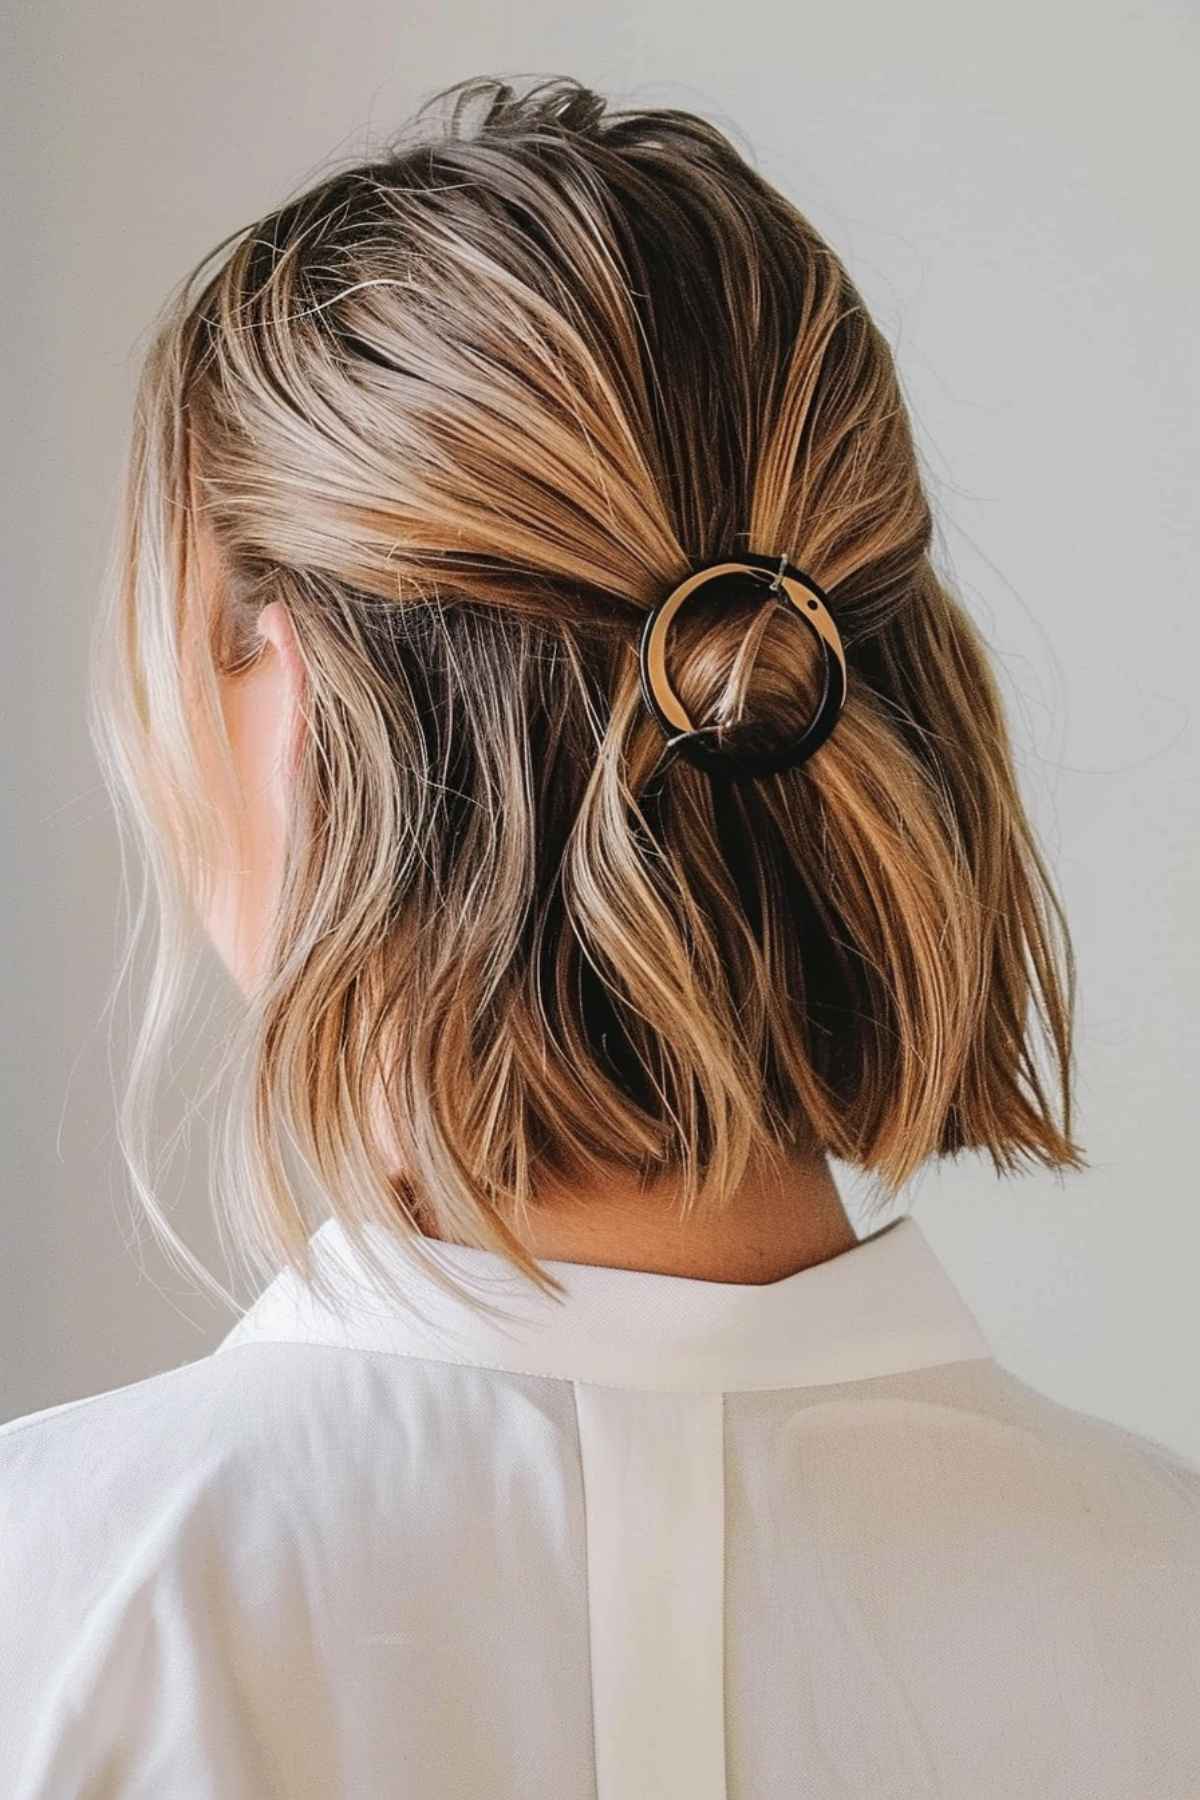 Effortless short hair updo with circular clip for hot weather